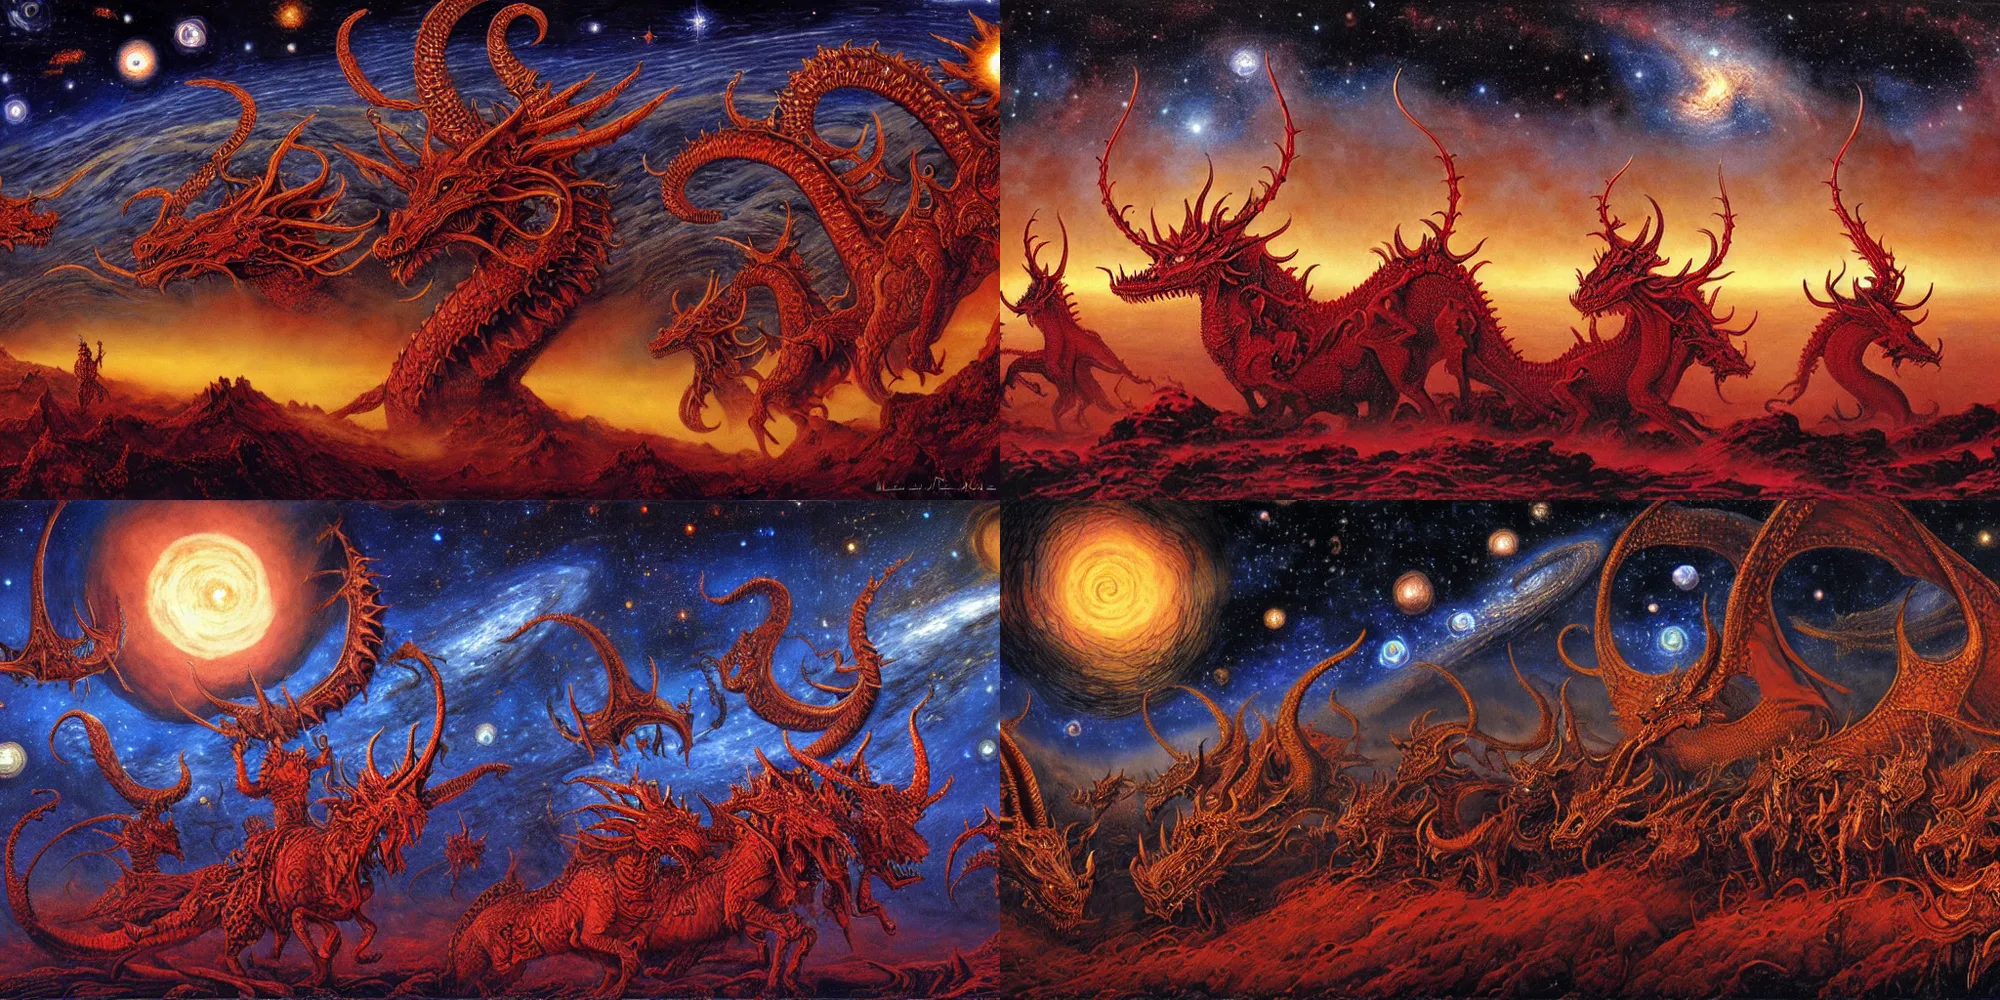 Prompt: diadems, crowns, on a ten horned beast with seven heads, fiery red, detailed, intricate, matte painting by Les Edwards, Jim Burns and Michael Whelan, in background starry night sky and distant earth, milky way, dragon tail